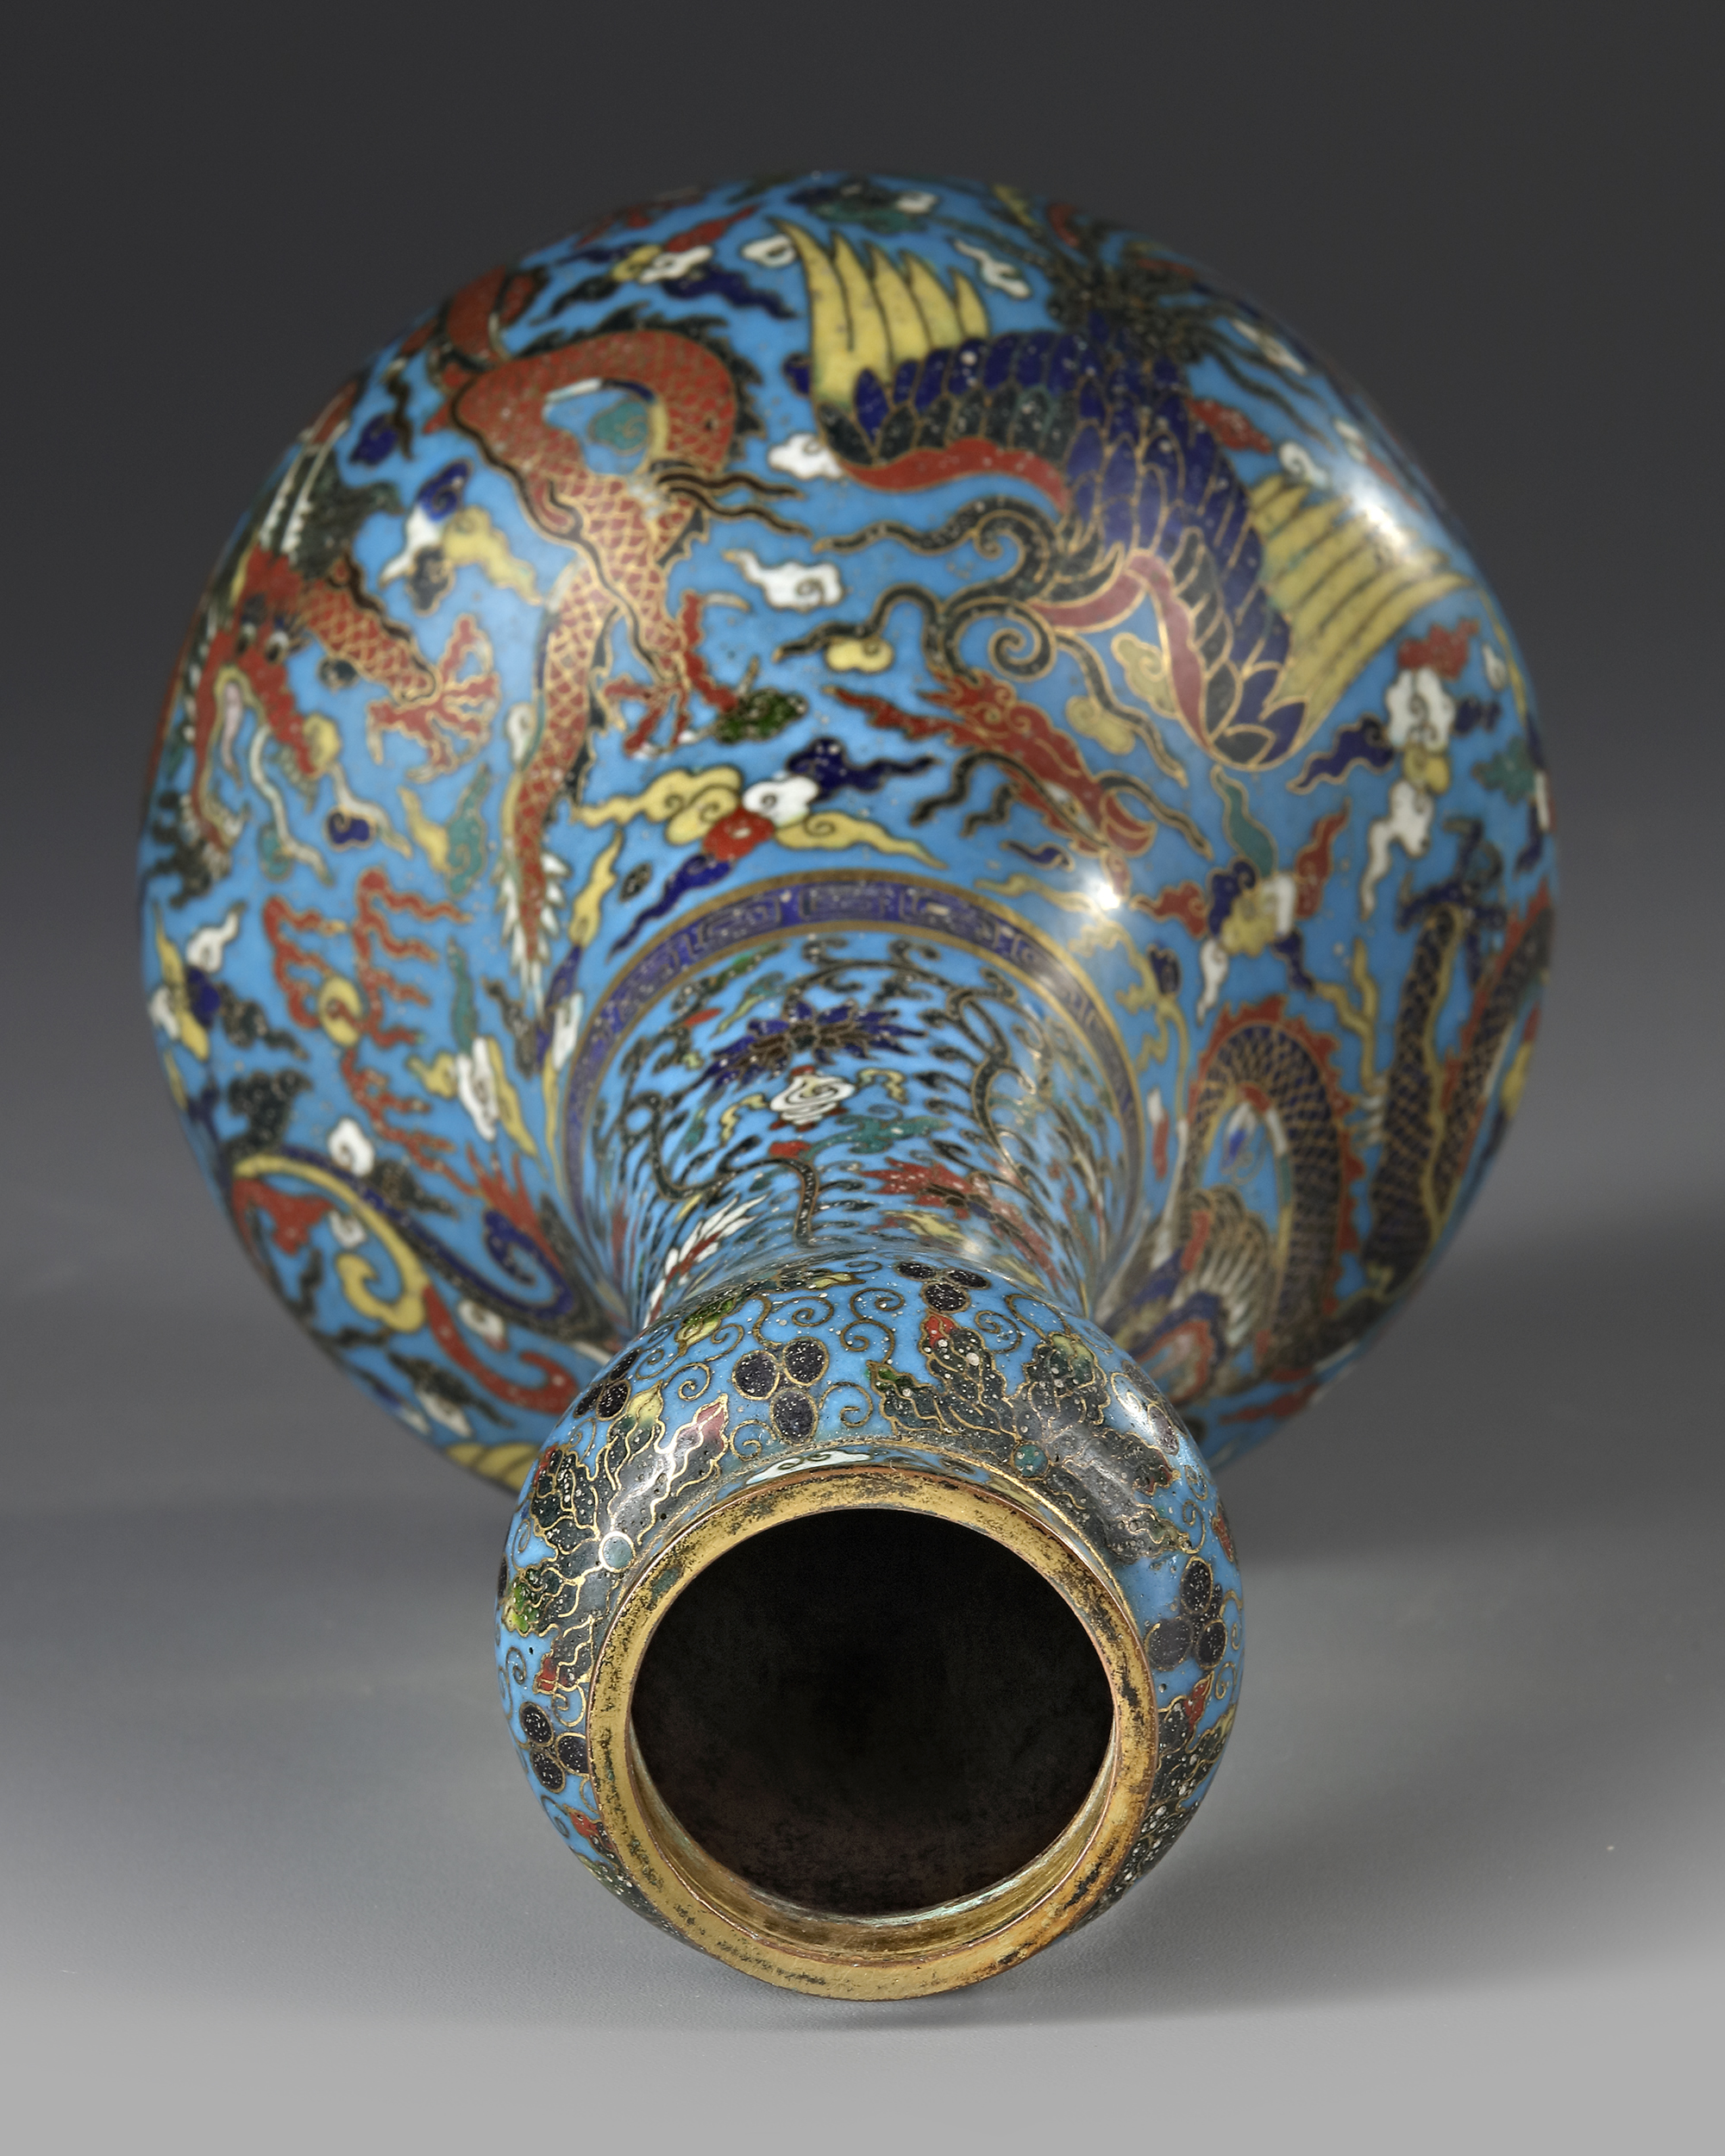 A CHINESE CLOISONNÉ ENAMEL GARLIC HEAD VASE, JINGTAI INCISED SIX-CHARACTER MARK IN A LINE (1450-1456 - Image 3 of 5